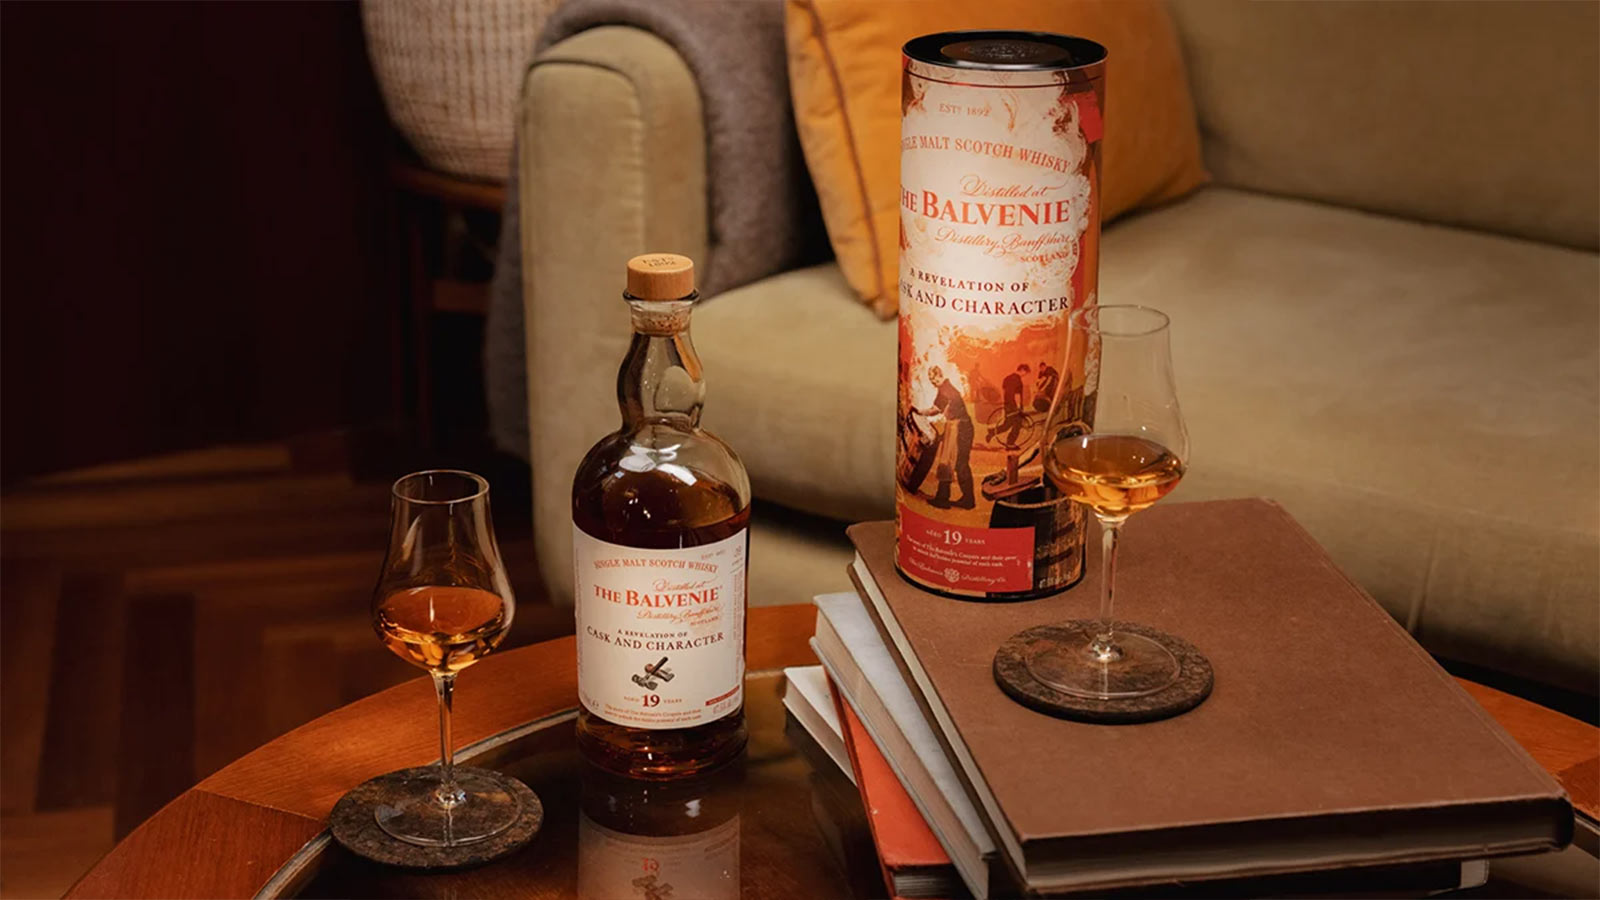 THE BALVENIE 'A REVELATION OF CASK AND CHARACTER'